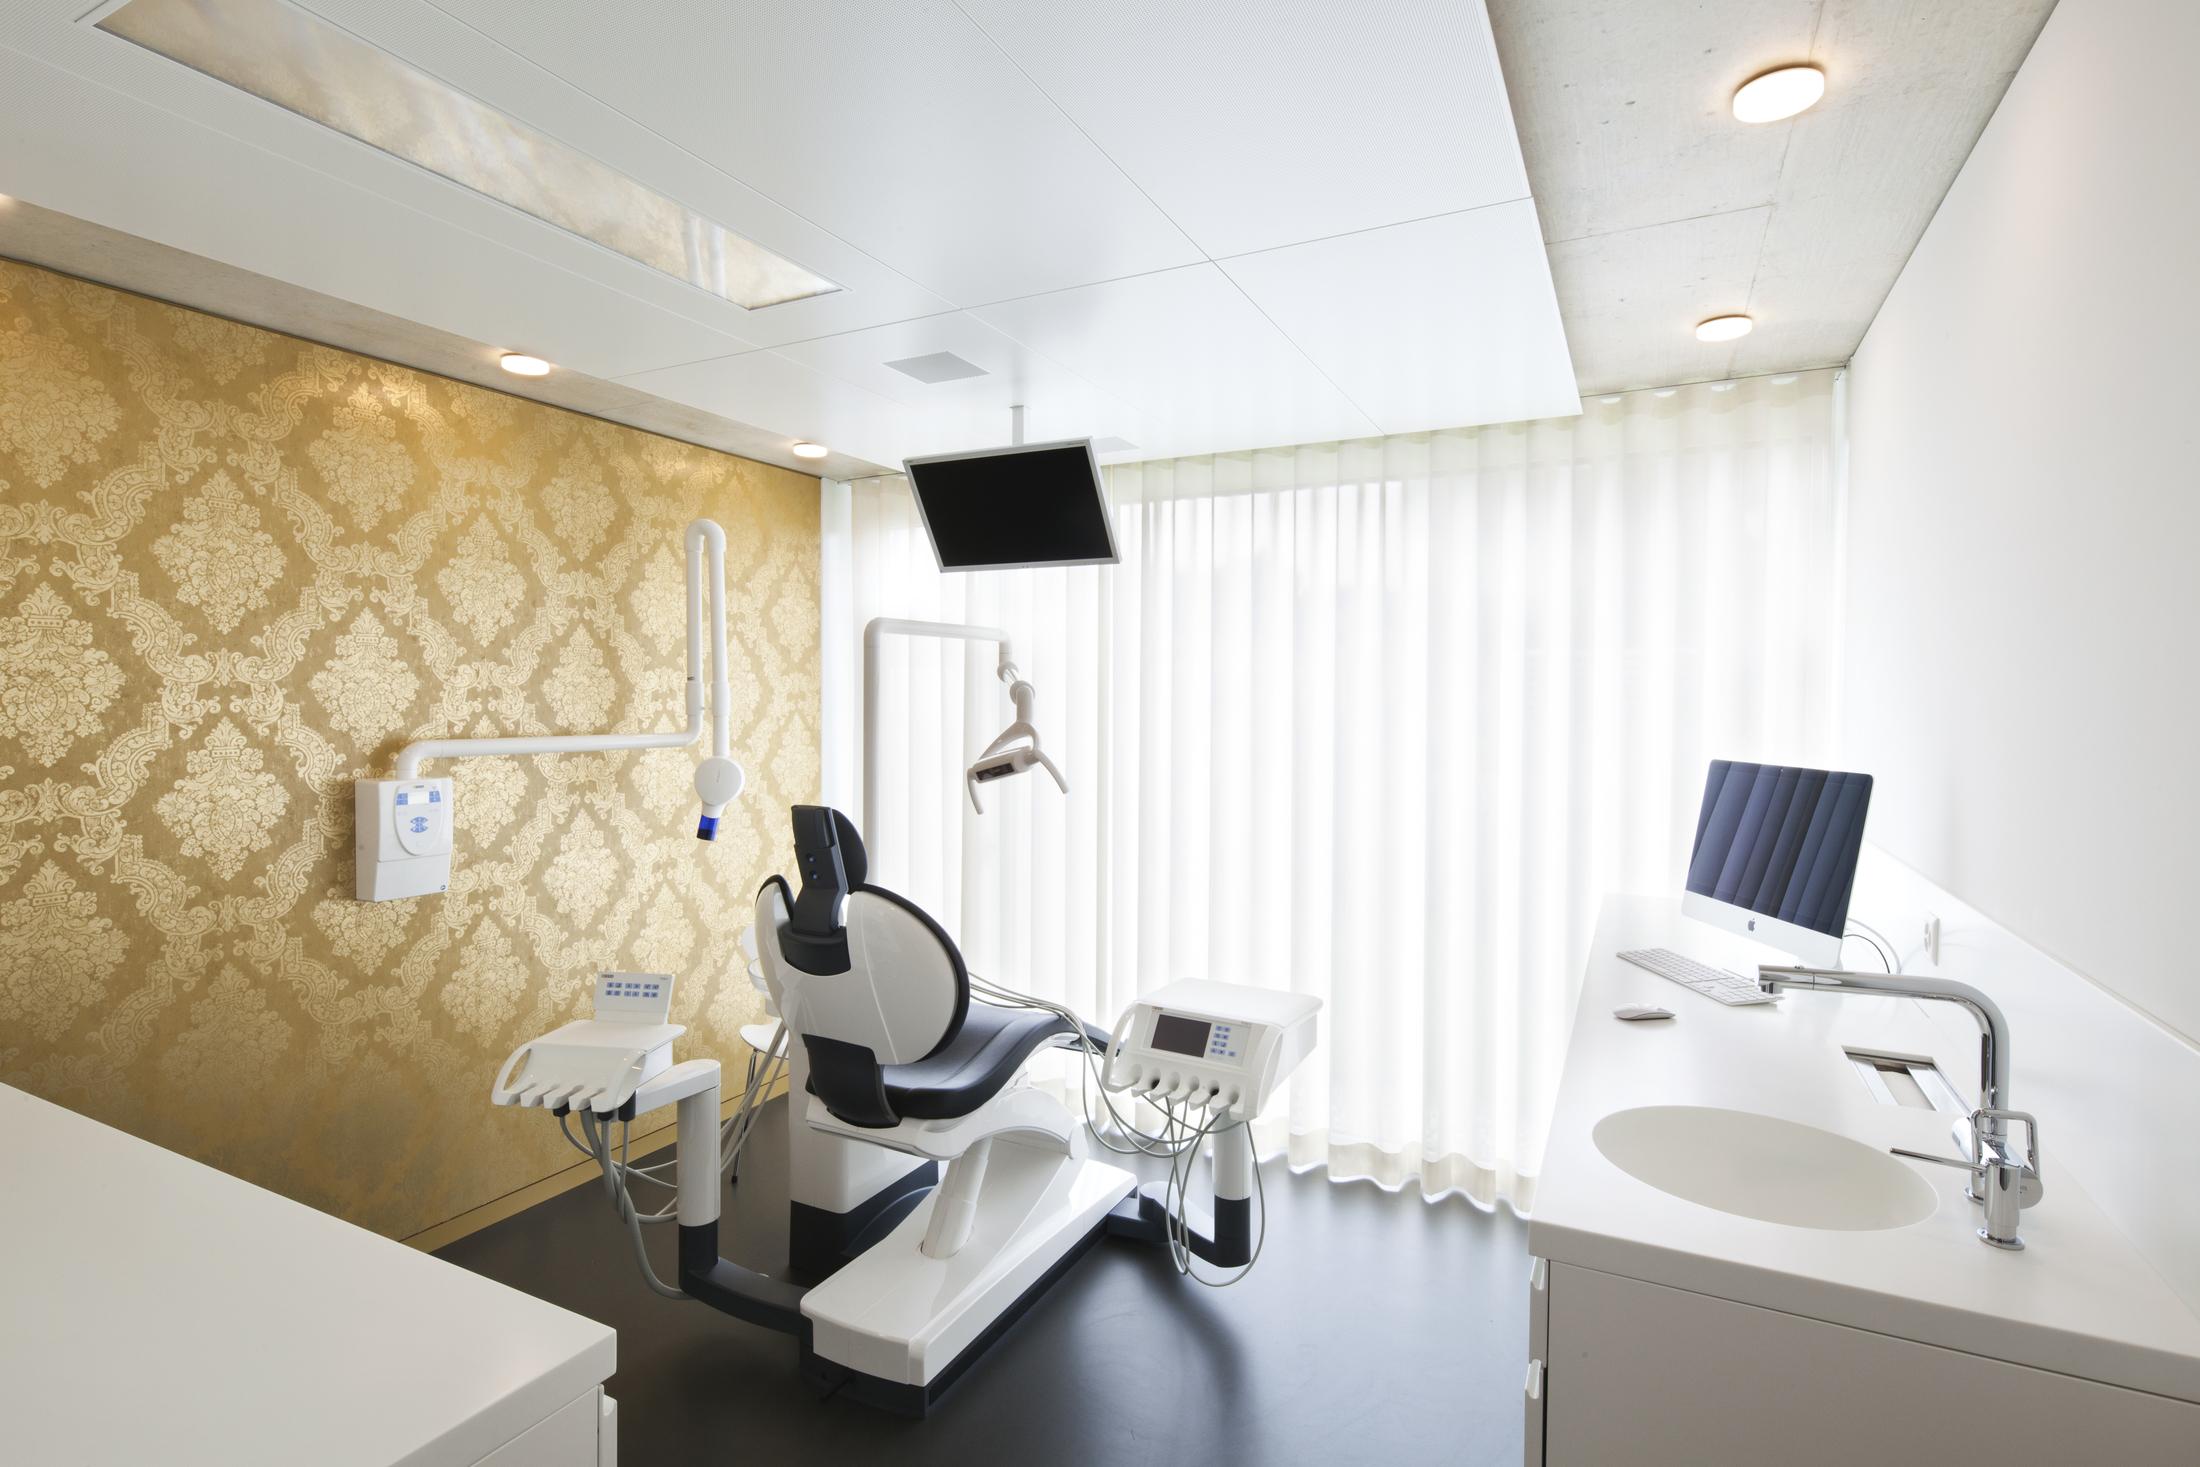 RIBAG PUNTO Mounted lamps in the corridor of the dental studio